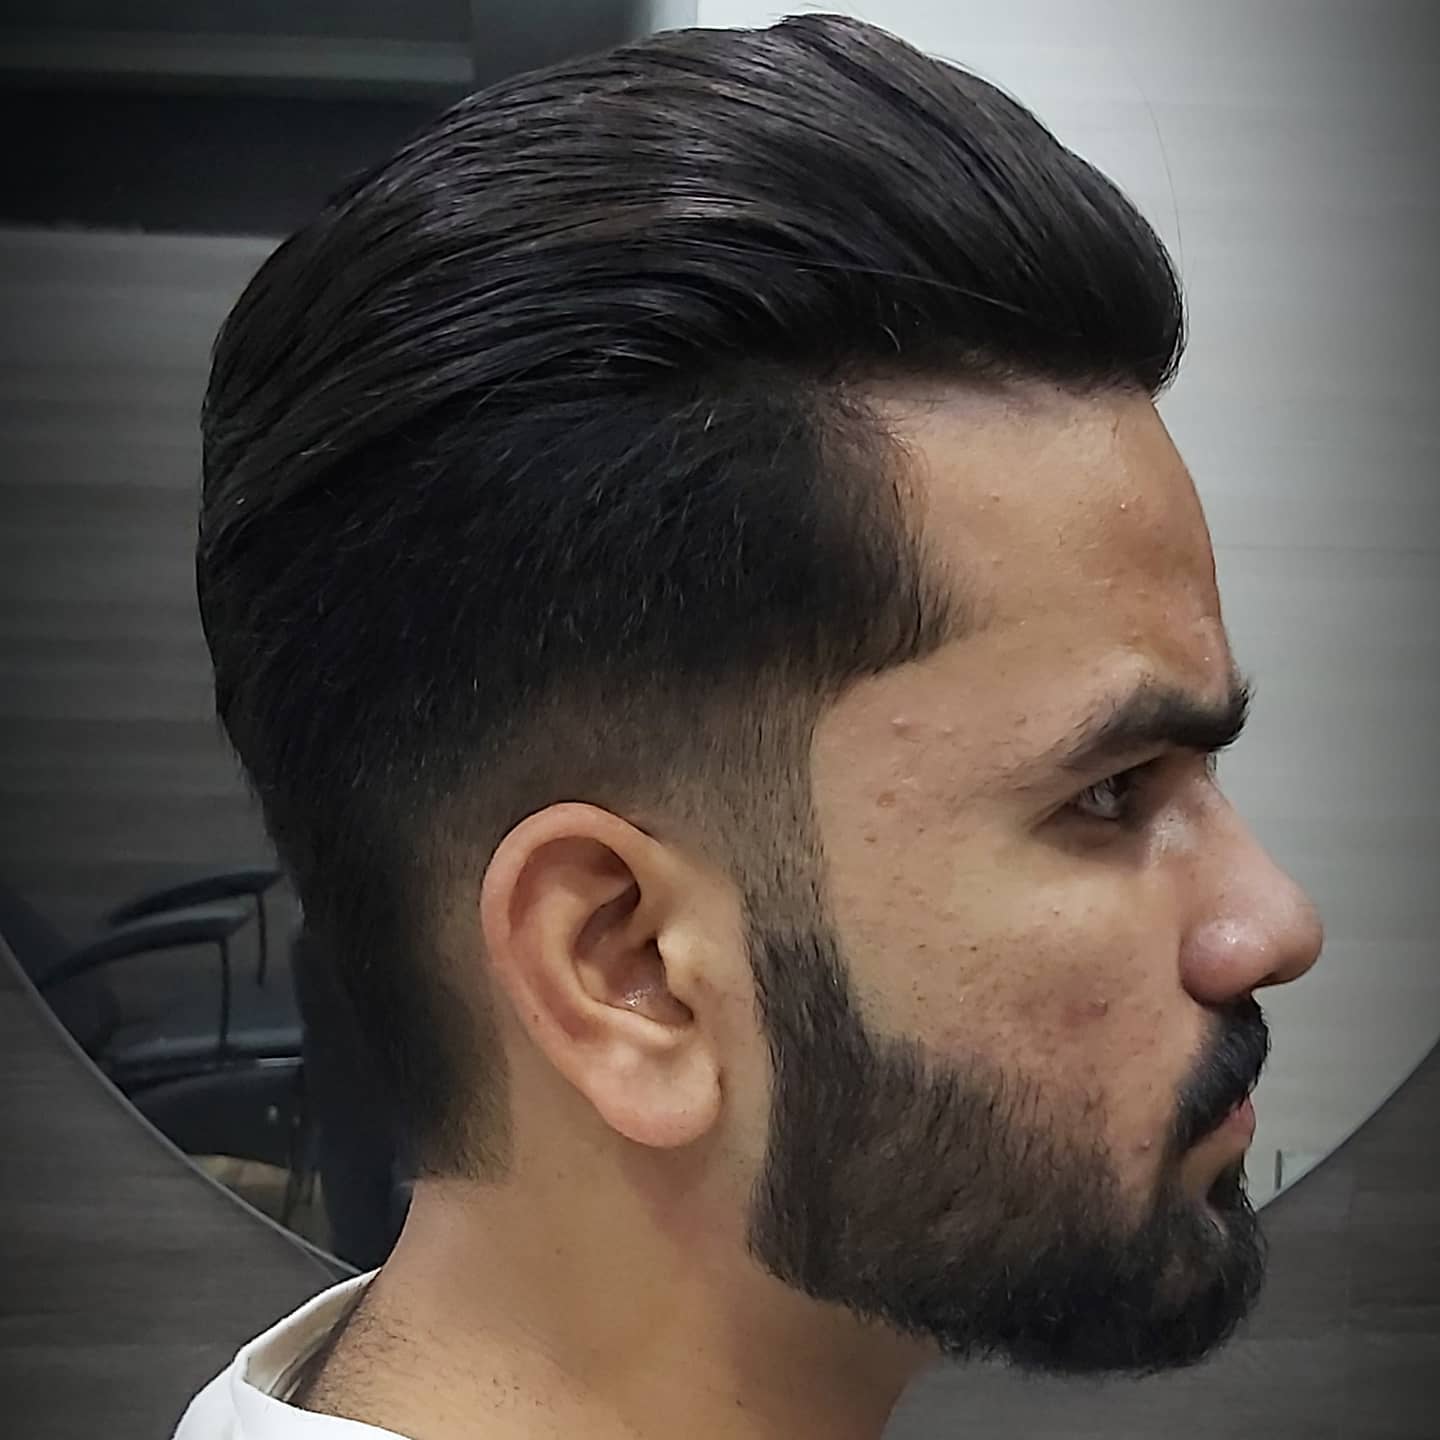 Hairstyle for Men 78 best haircut for men | haircut for men | haircuts for men Haircut for Men